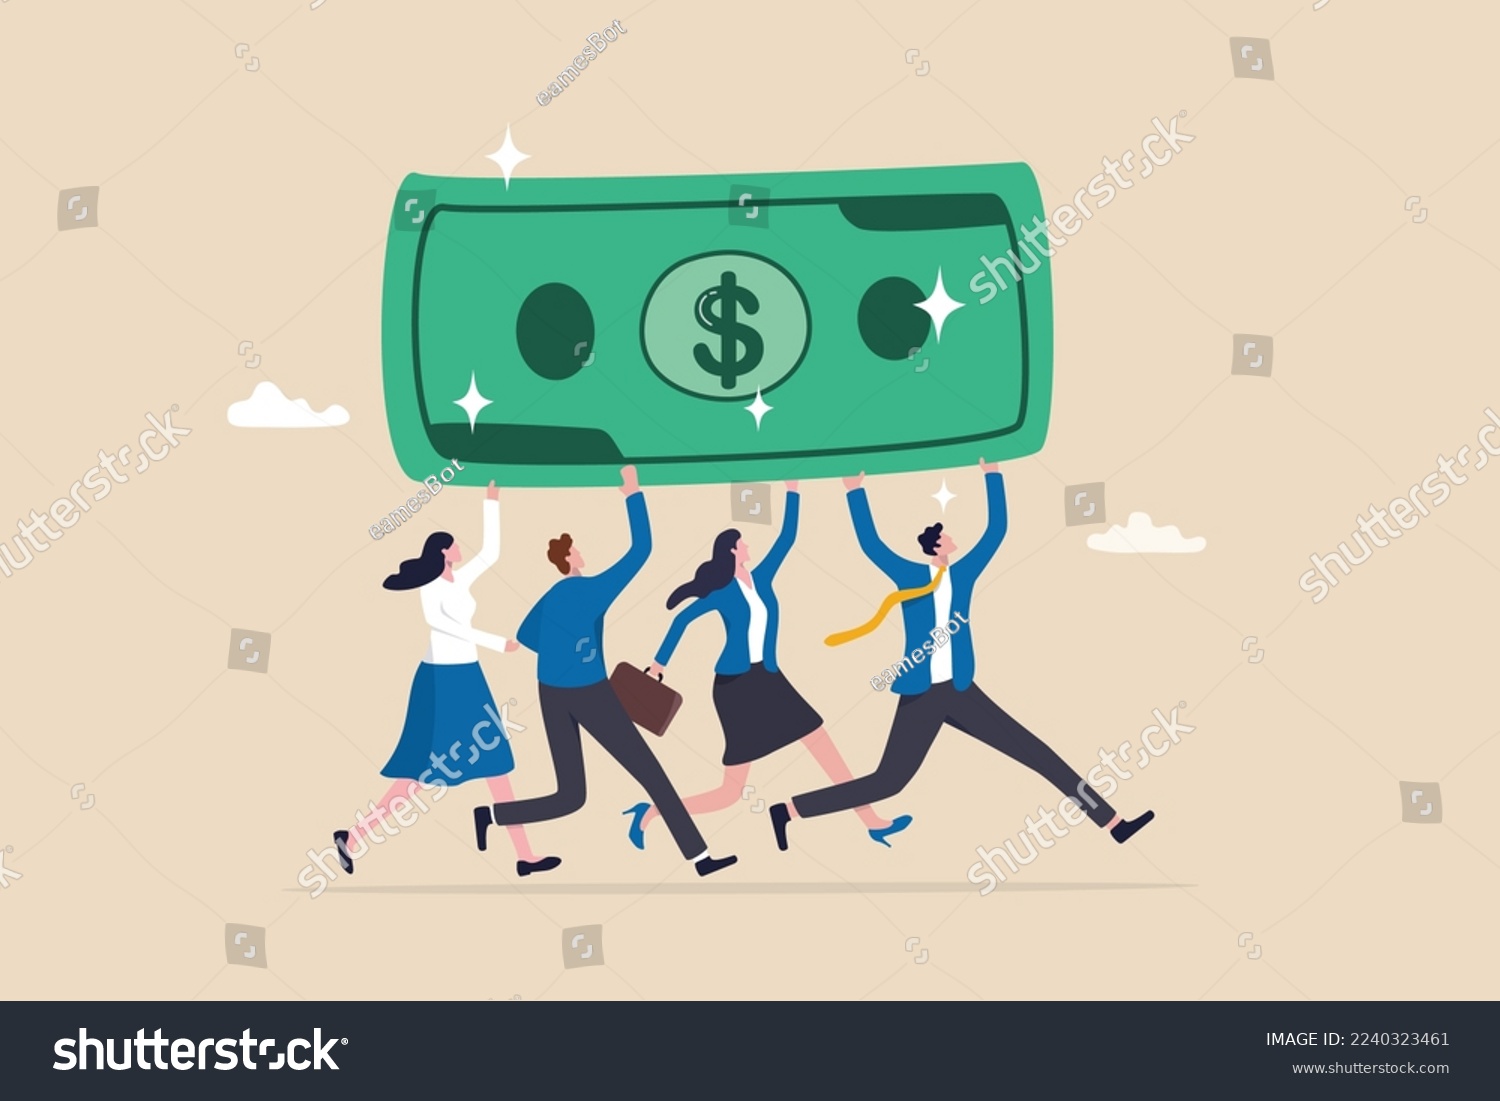 People carry money dollar banknote metaphor of capital, salary or income, wages to pay and purchase value, banking and investment, tax, economic and inflation concept. #2240323461